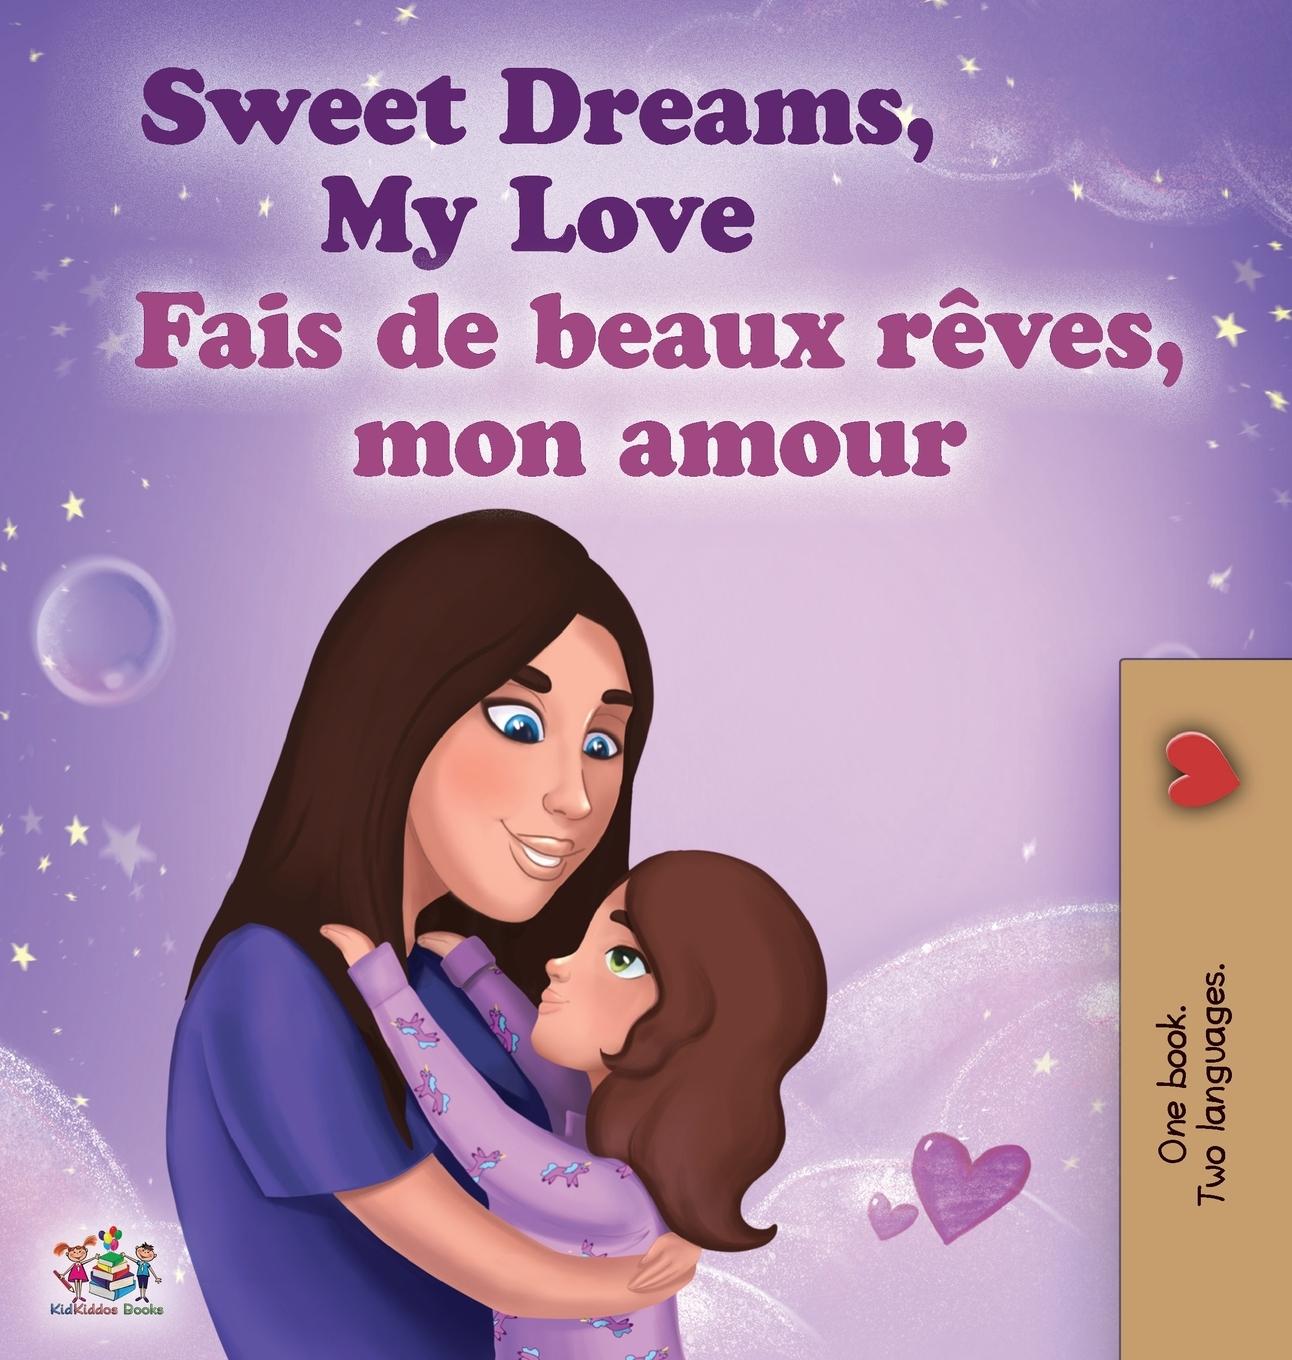 Könyv Sweet Dreams, My Love (English French Bilingual Book for Kids) Kidkiddos Books